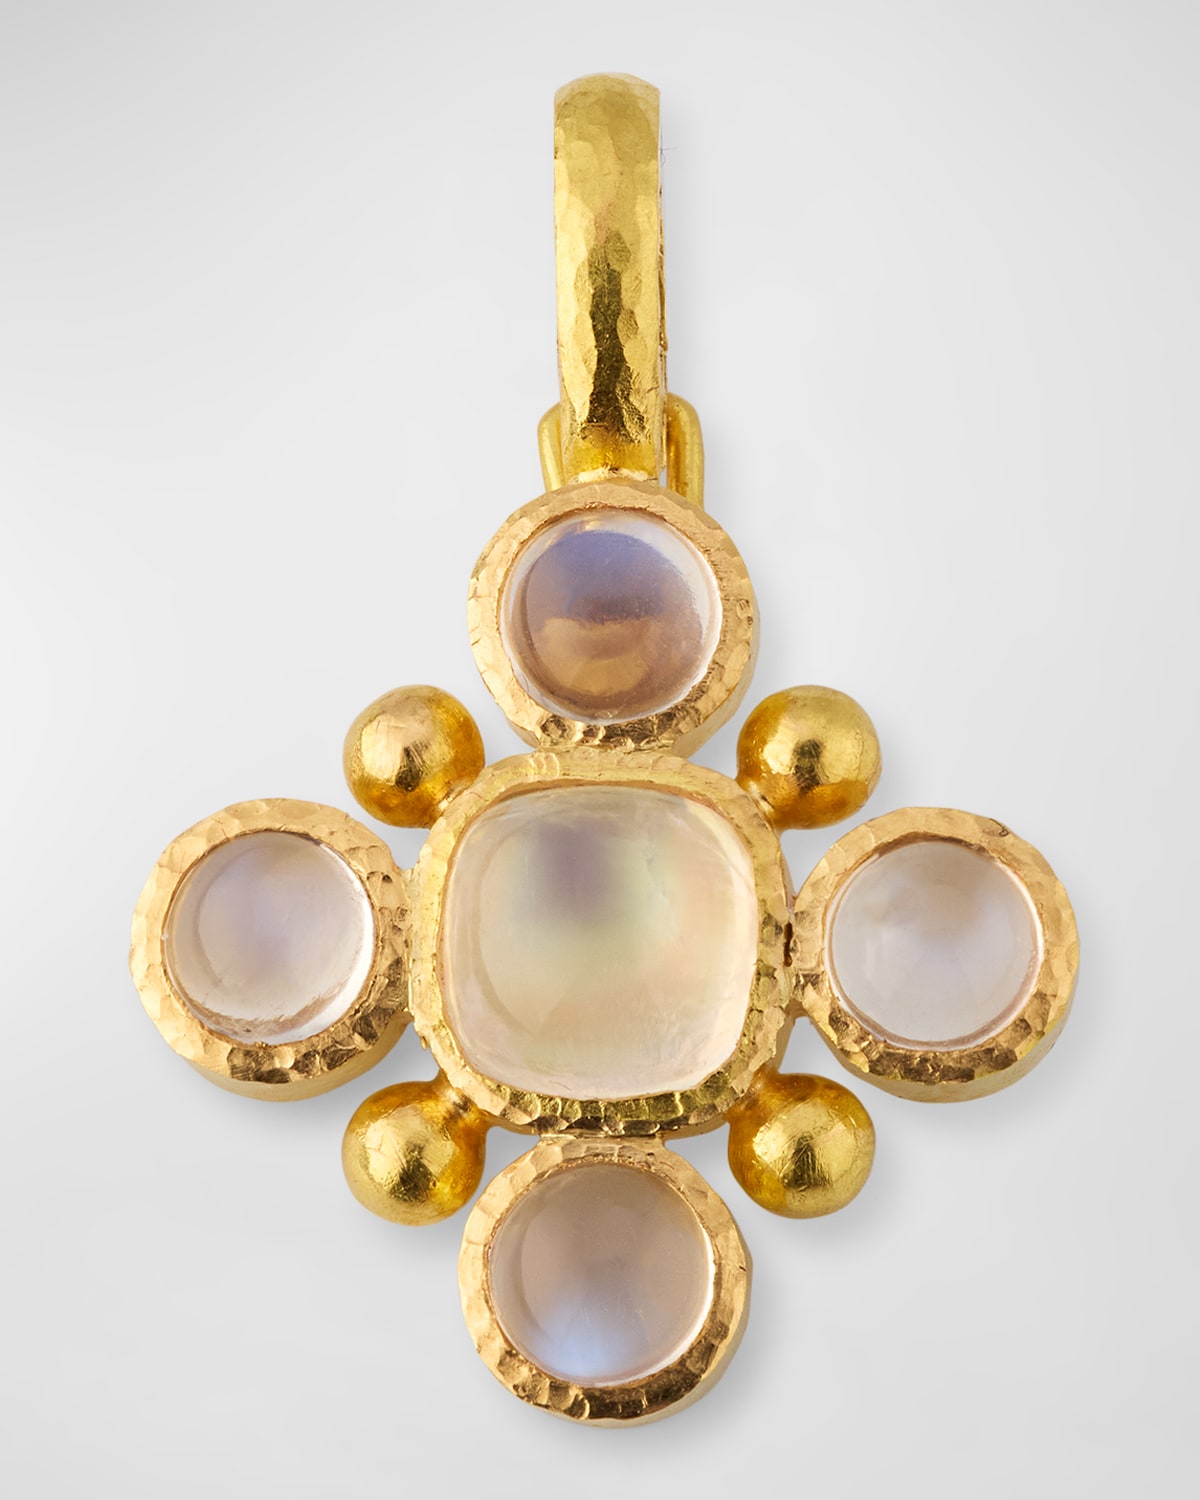 19K Yellow Gold Cushion Moonstone Pendant with Faceted Stones and Gold Dots